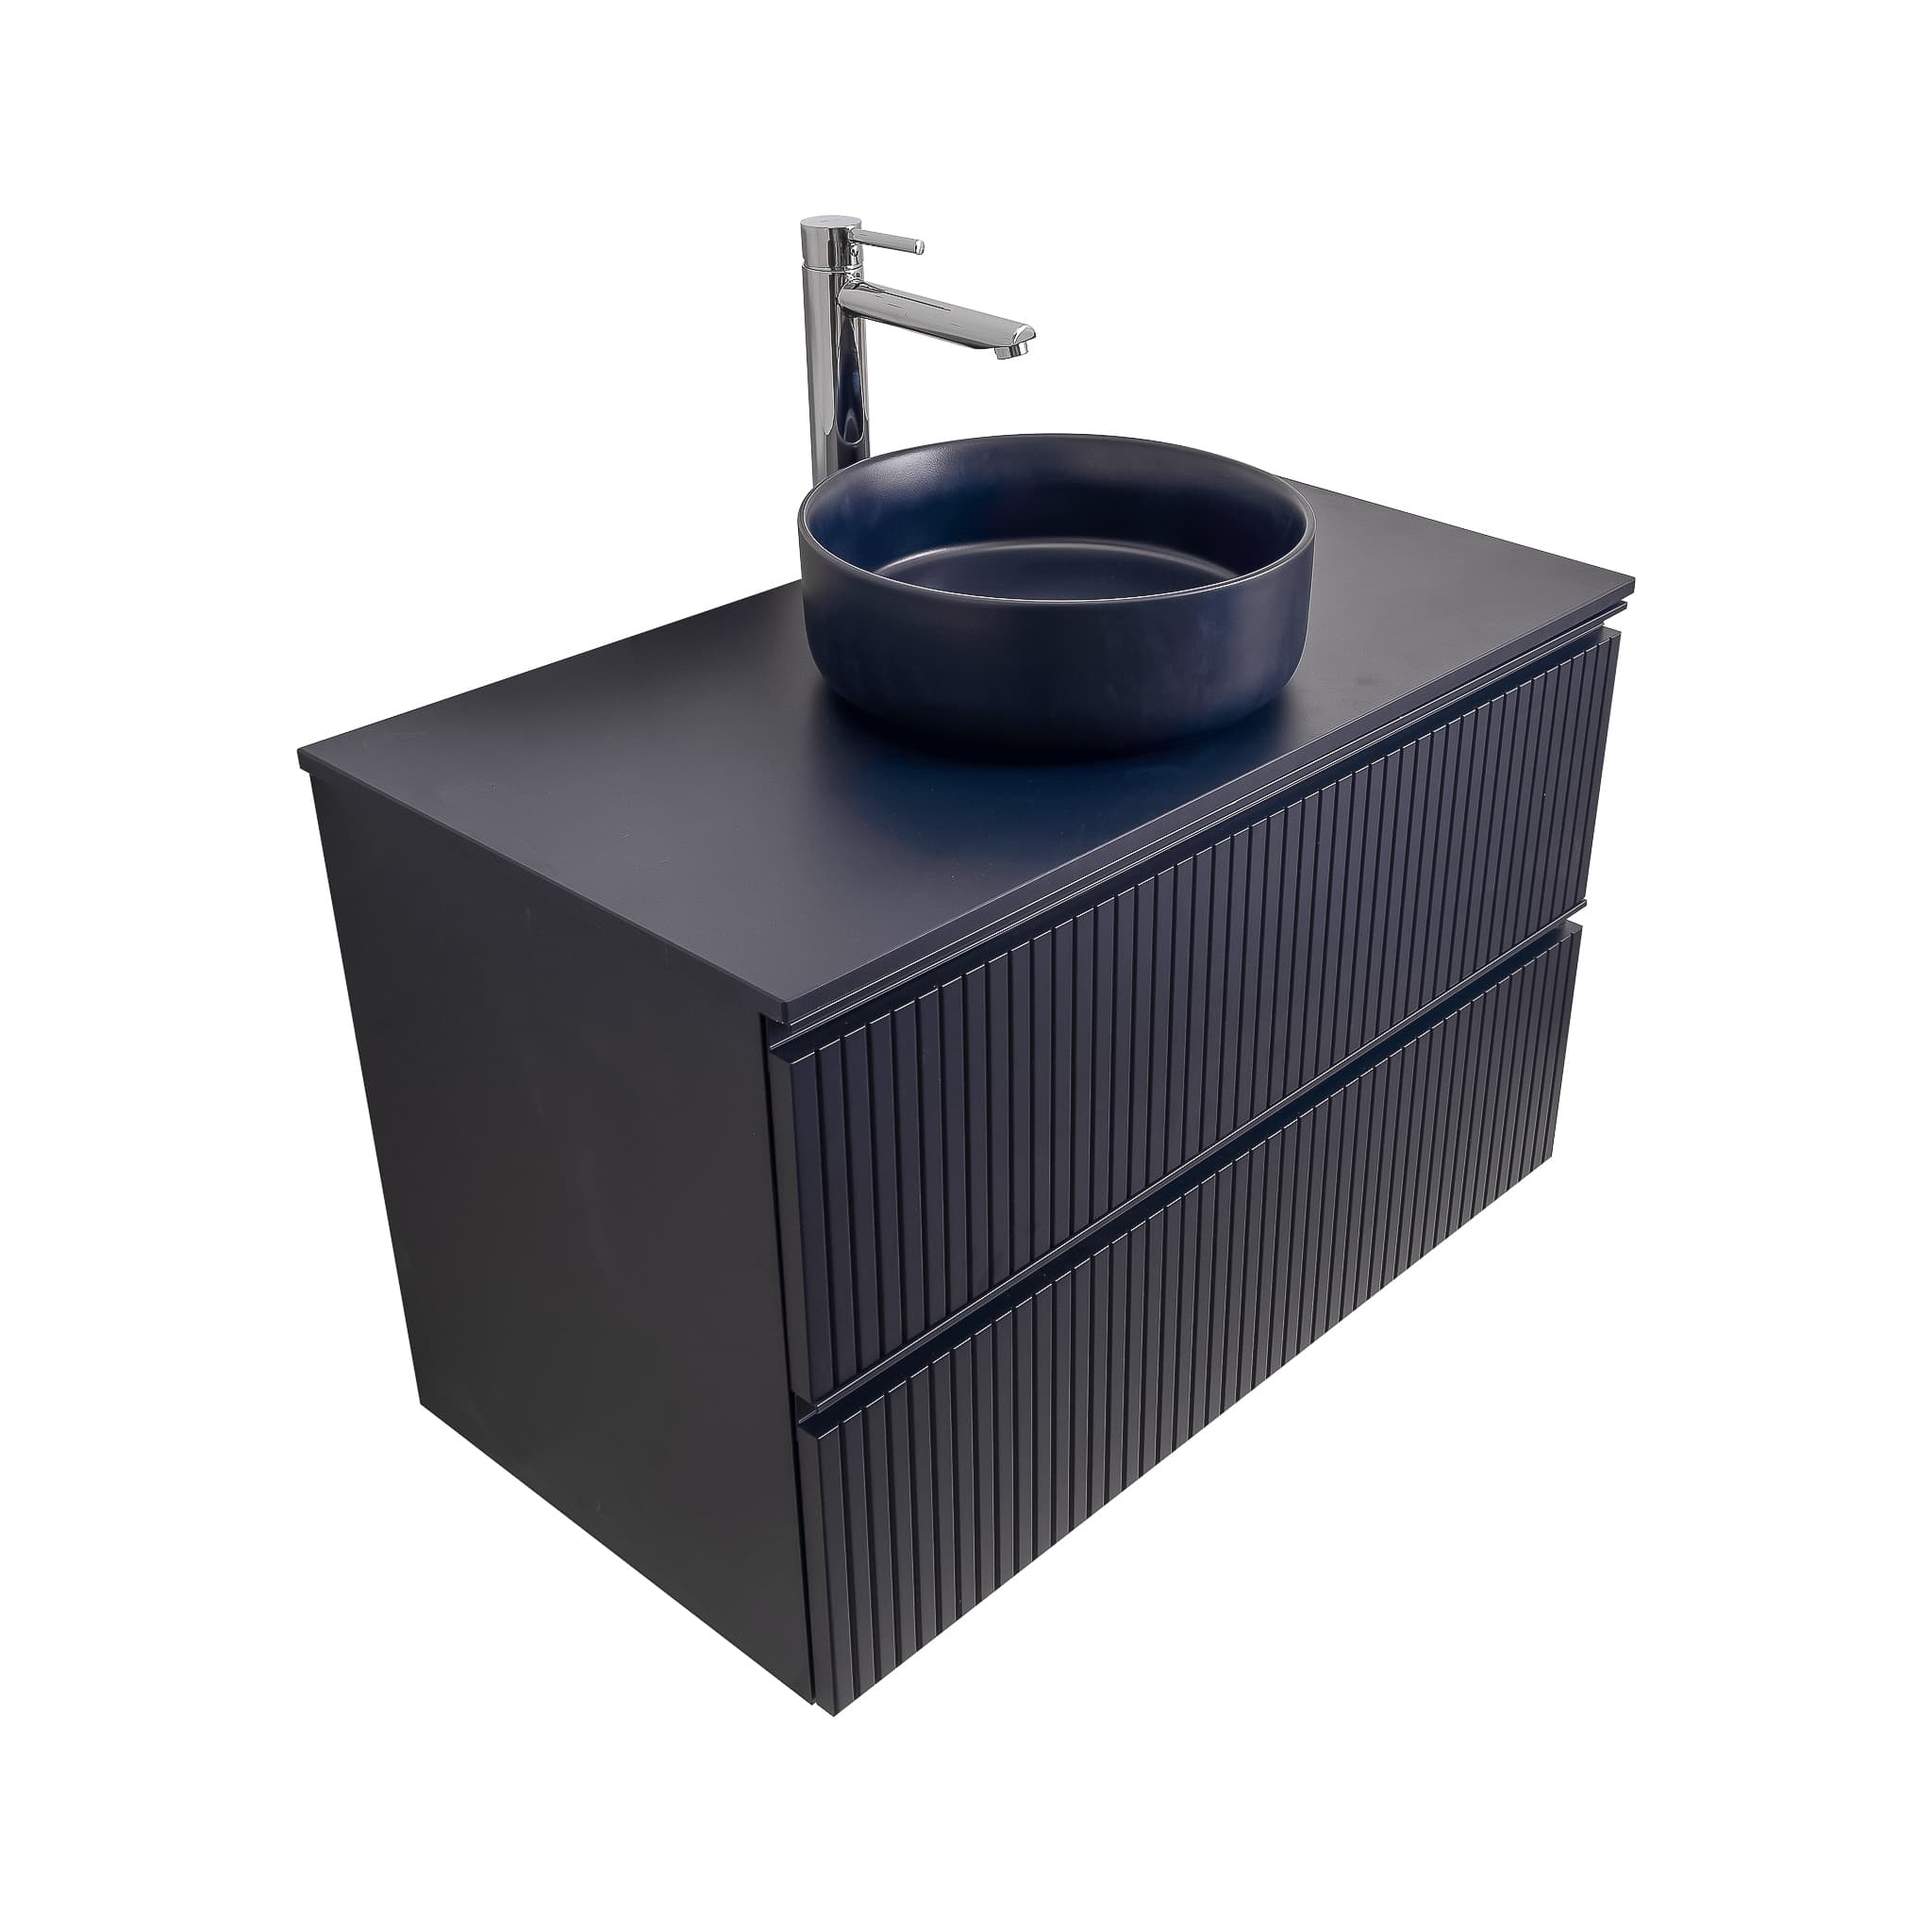 Ares 35.5 Matte Navy Blue Cabinet, Ares Navy Blue Top And Ares Navy Blue Ceramic Basin, Wall Mounted Modern Vanity Set